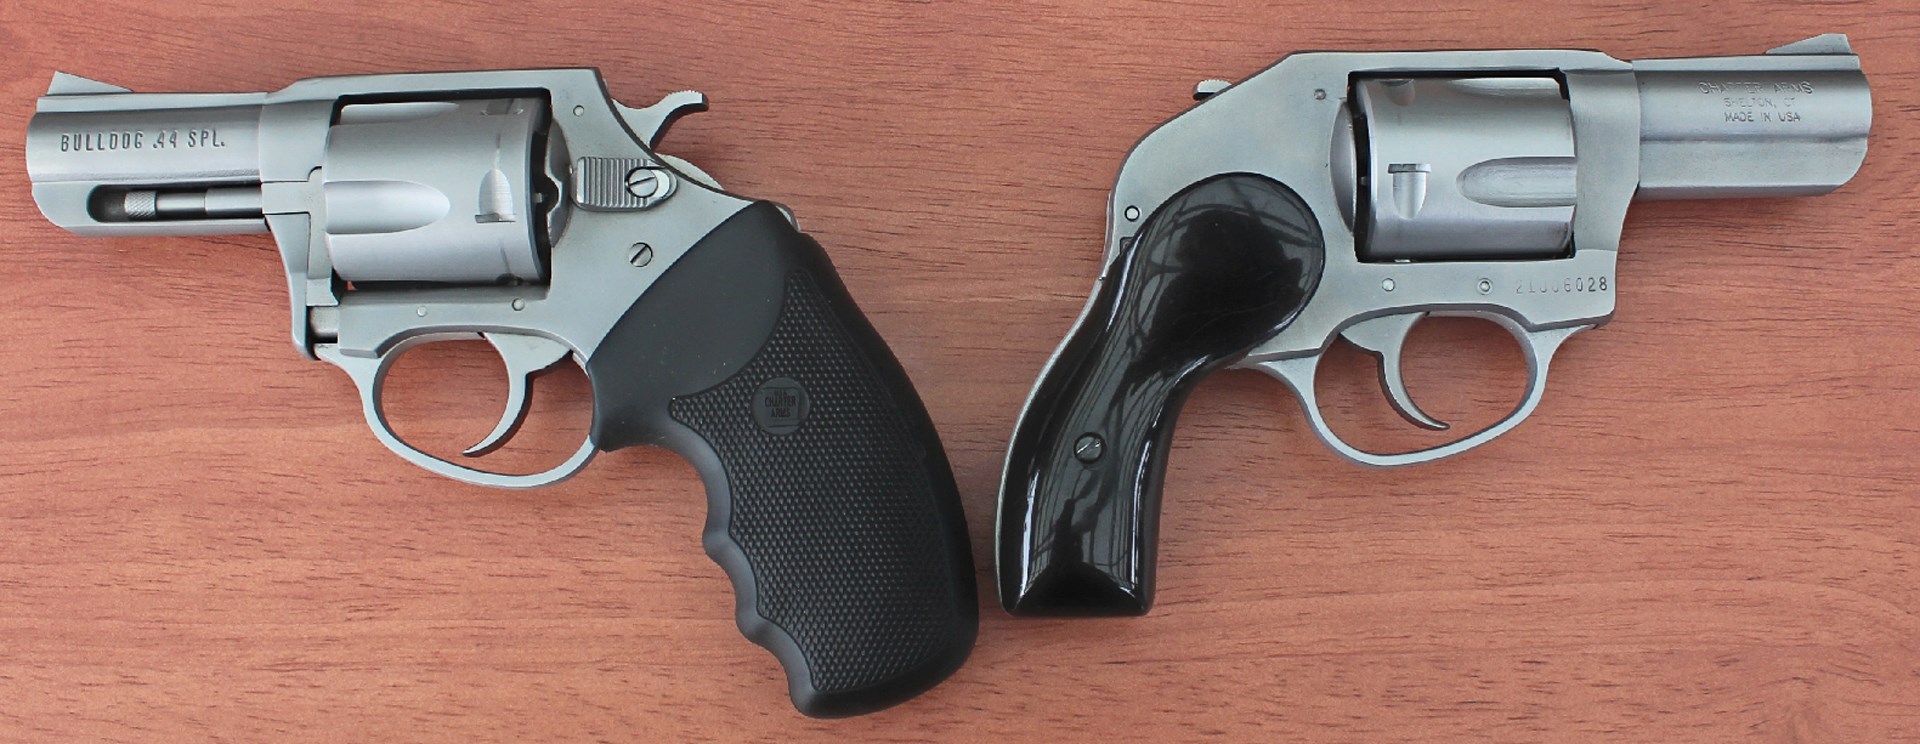 two charter arms bulldog .44 special revovler guns stainless steel comparison back to back